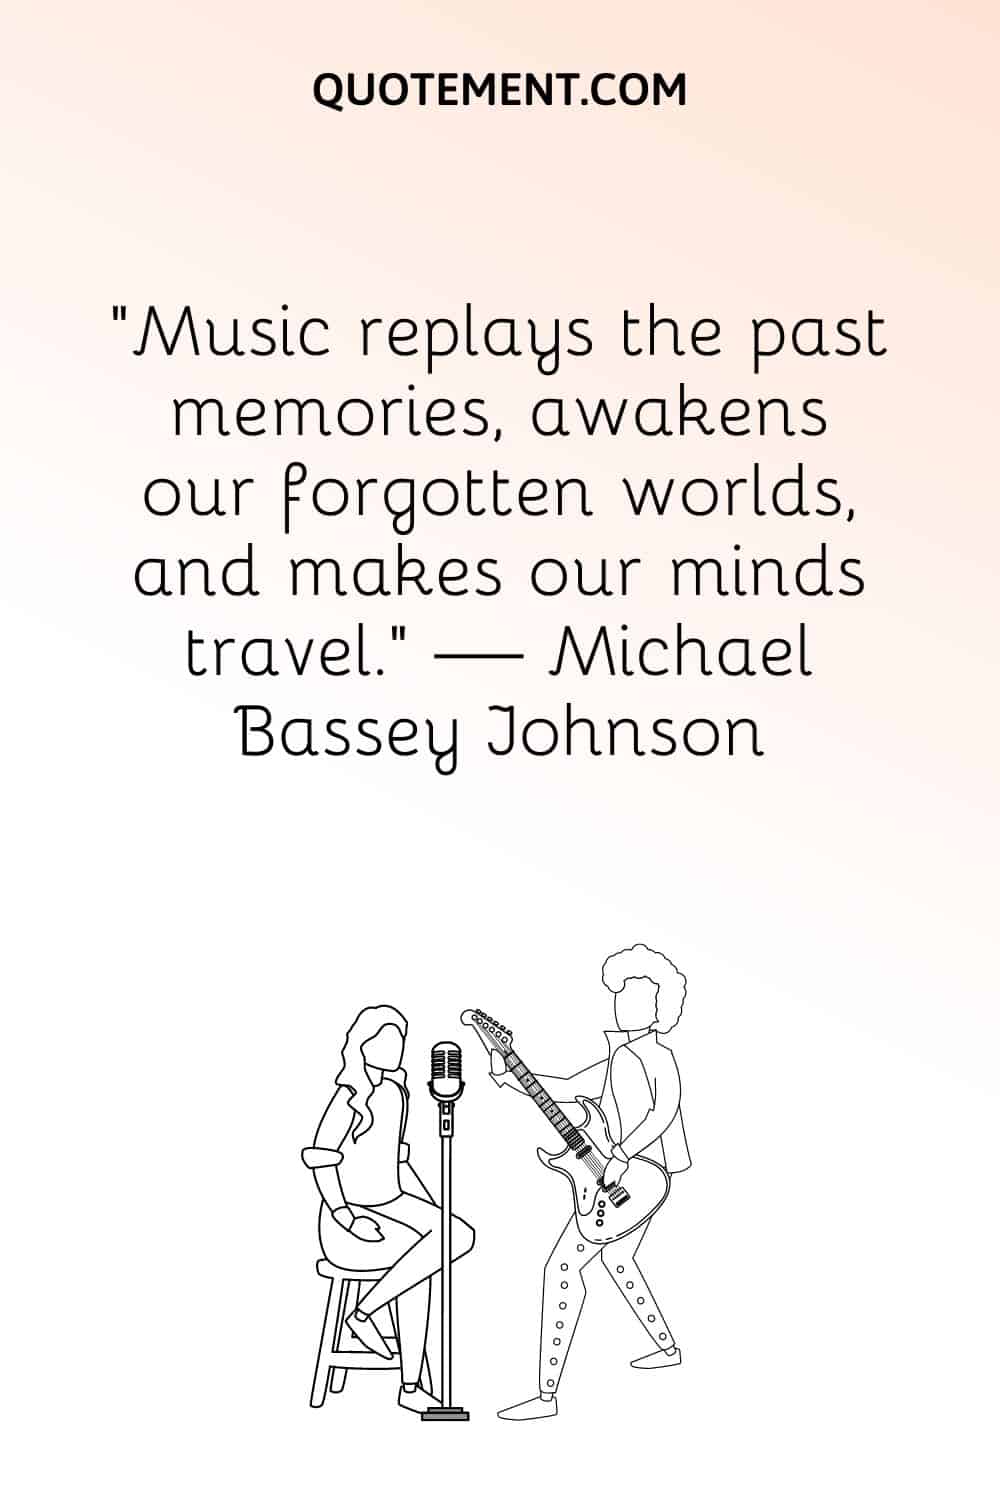 “Music replays the past memories, awakens our forgotten worlds, and makes our minds travel.” — Michael Bassey Johnson